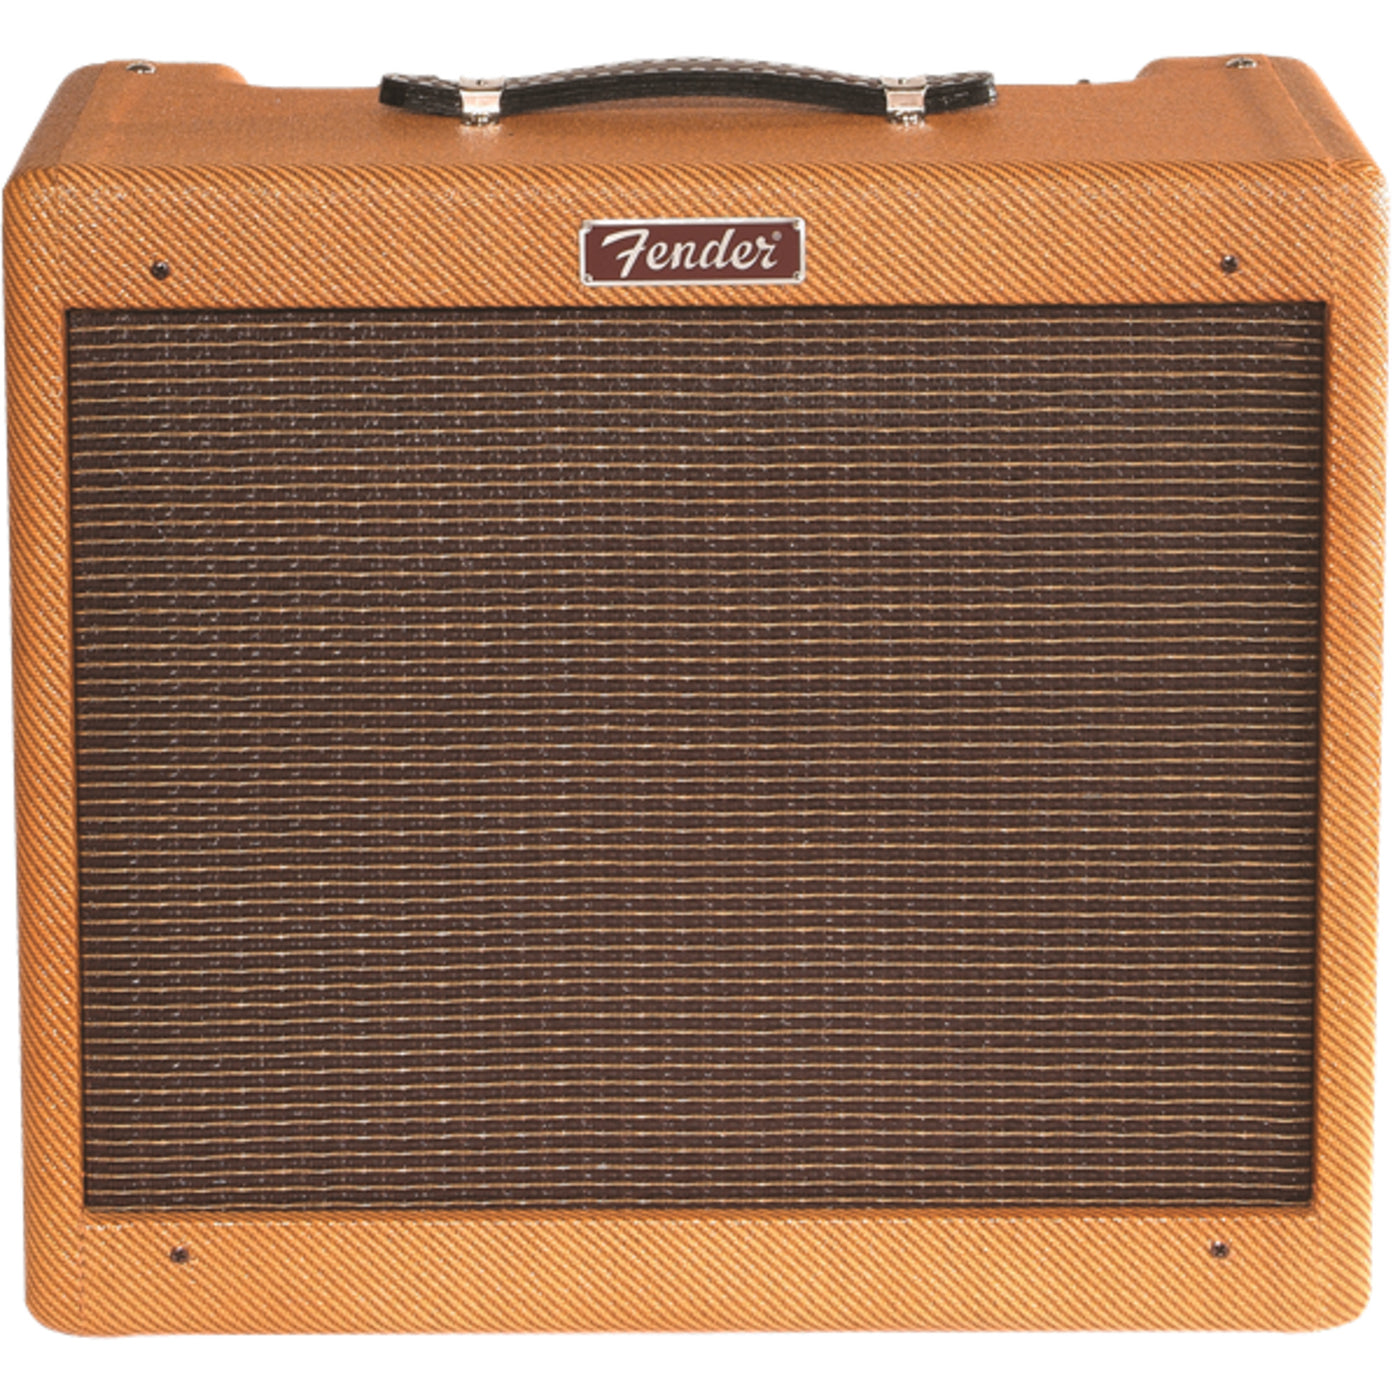 Fender Blues Junior Lacquered Tweed 15W Guitar Combo Amplifier (0213205700)